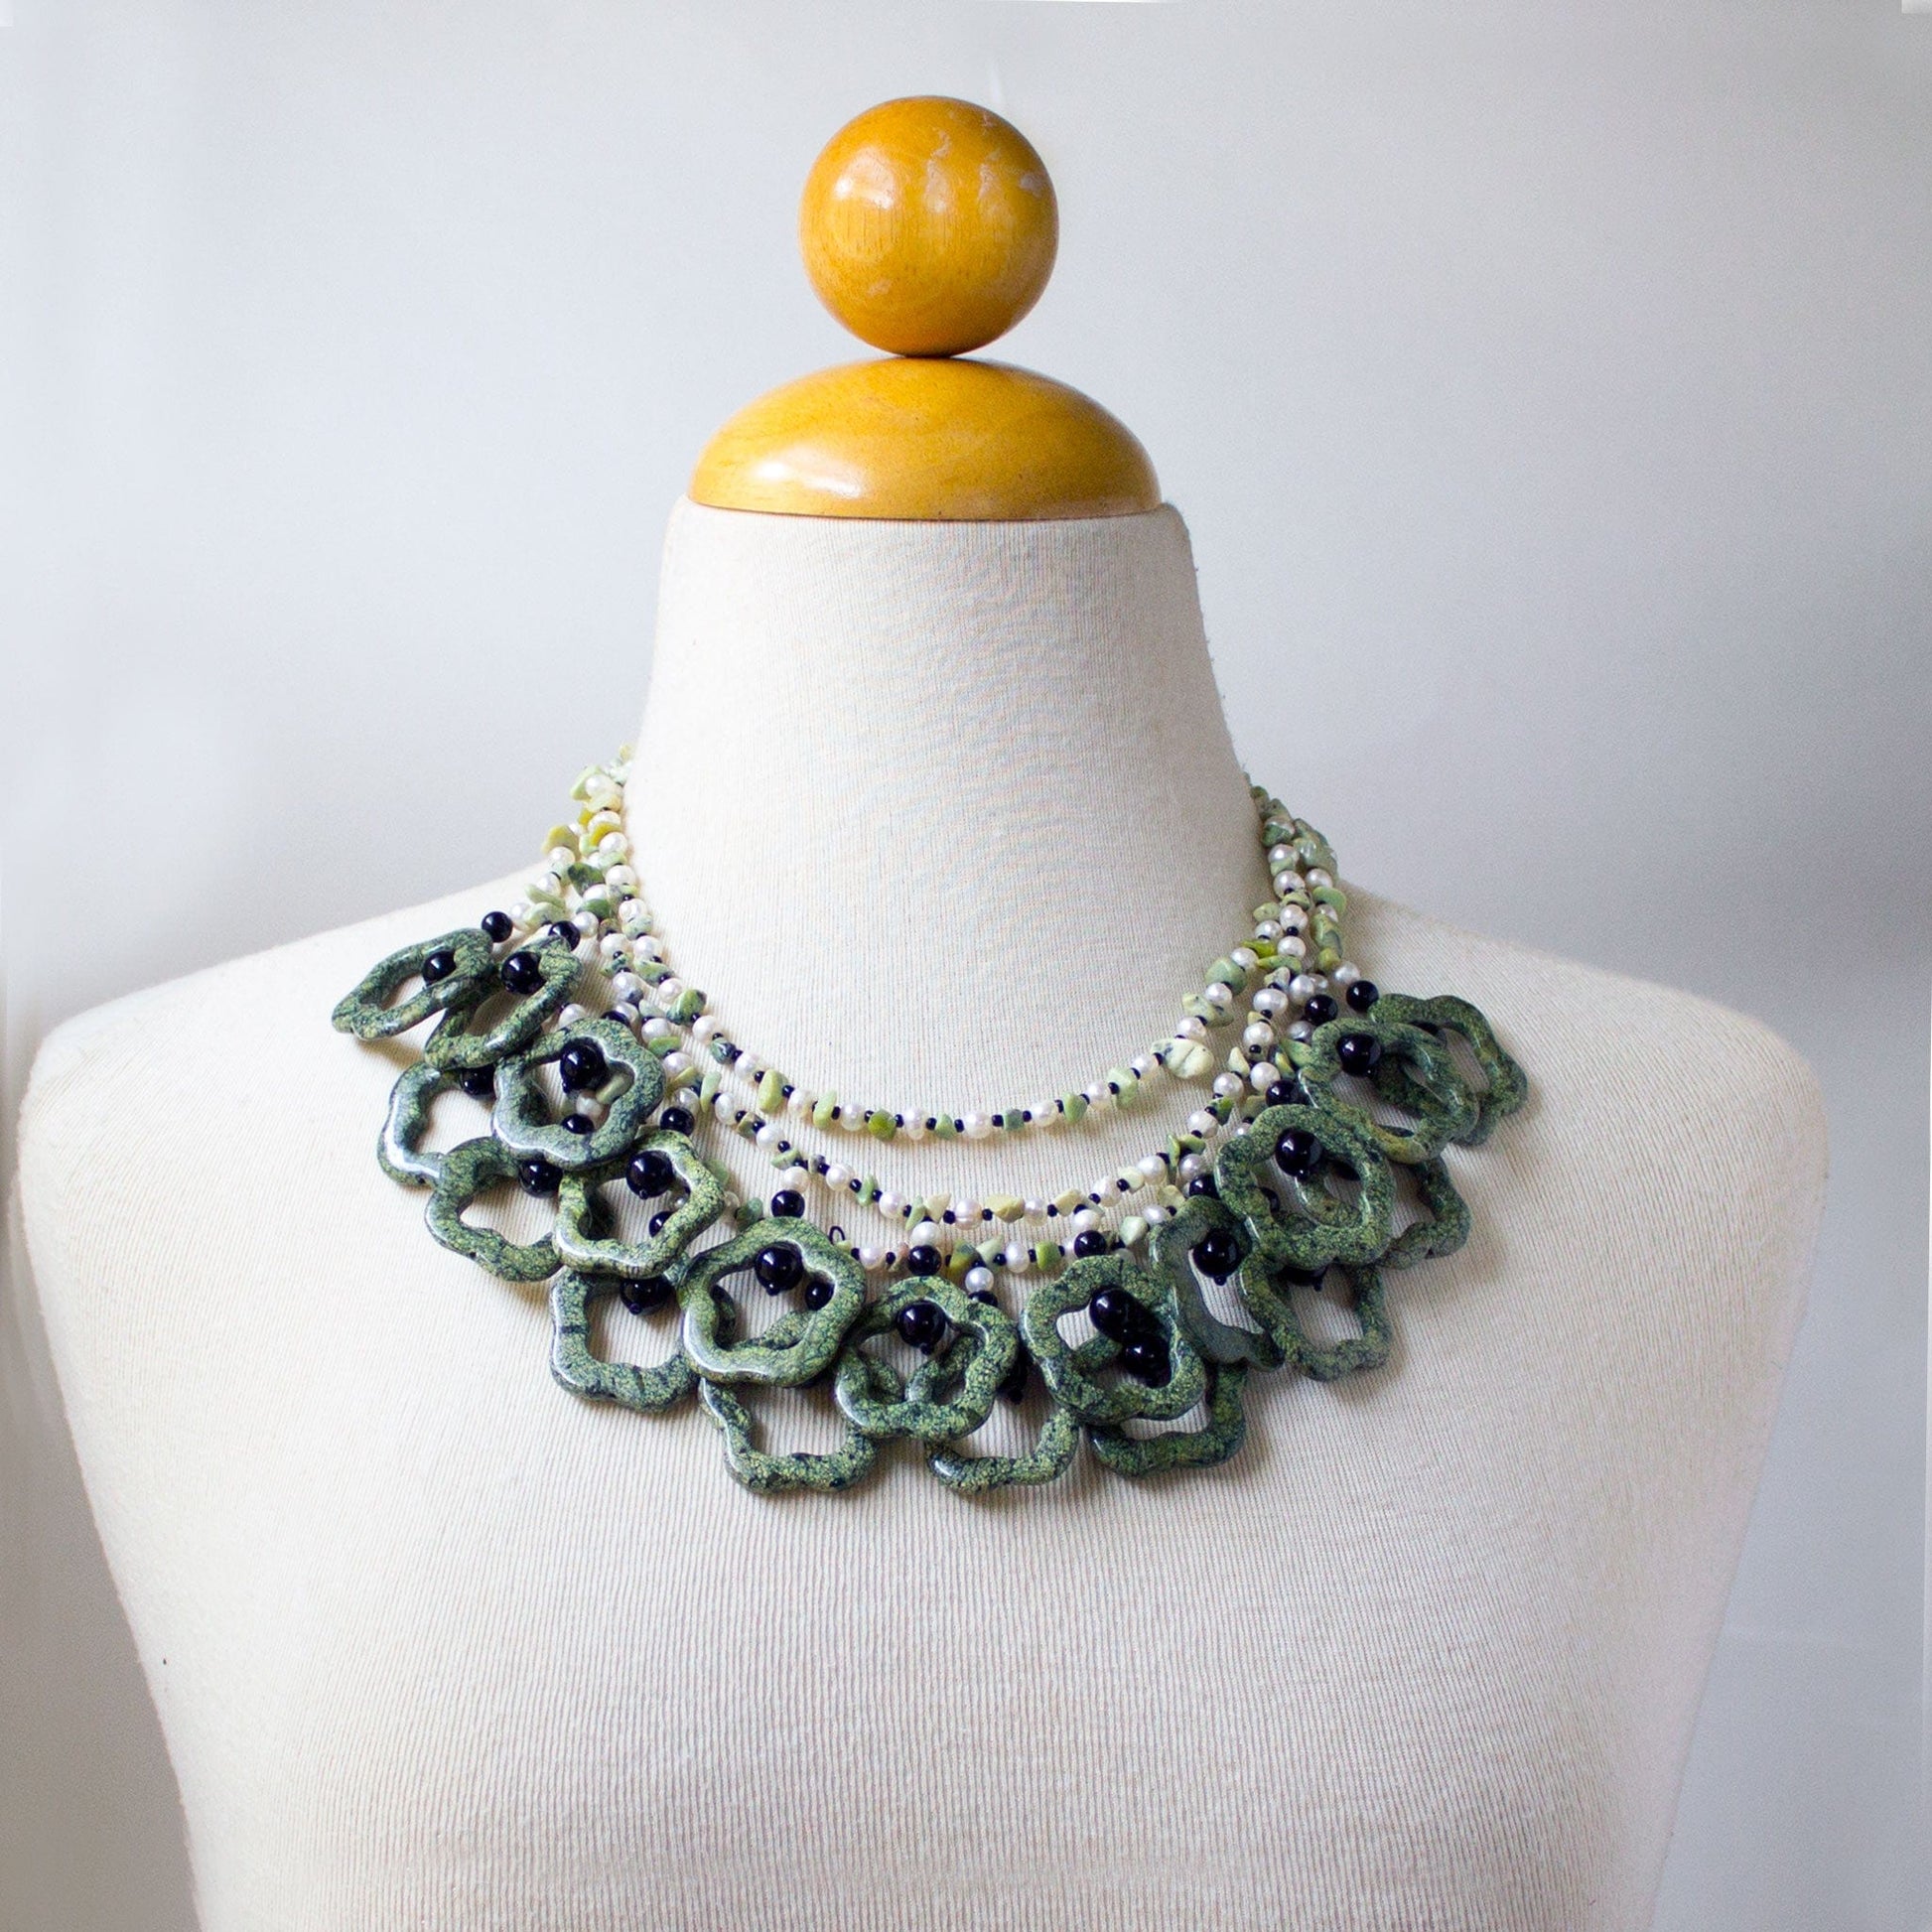 CasCai Pearl and Stone Necklace Jewelry